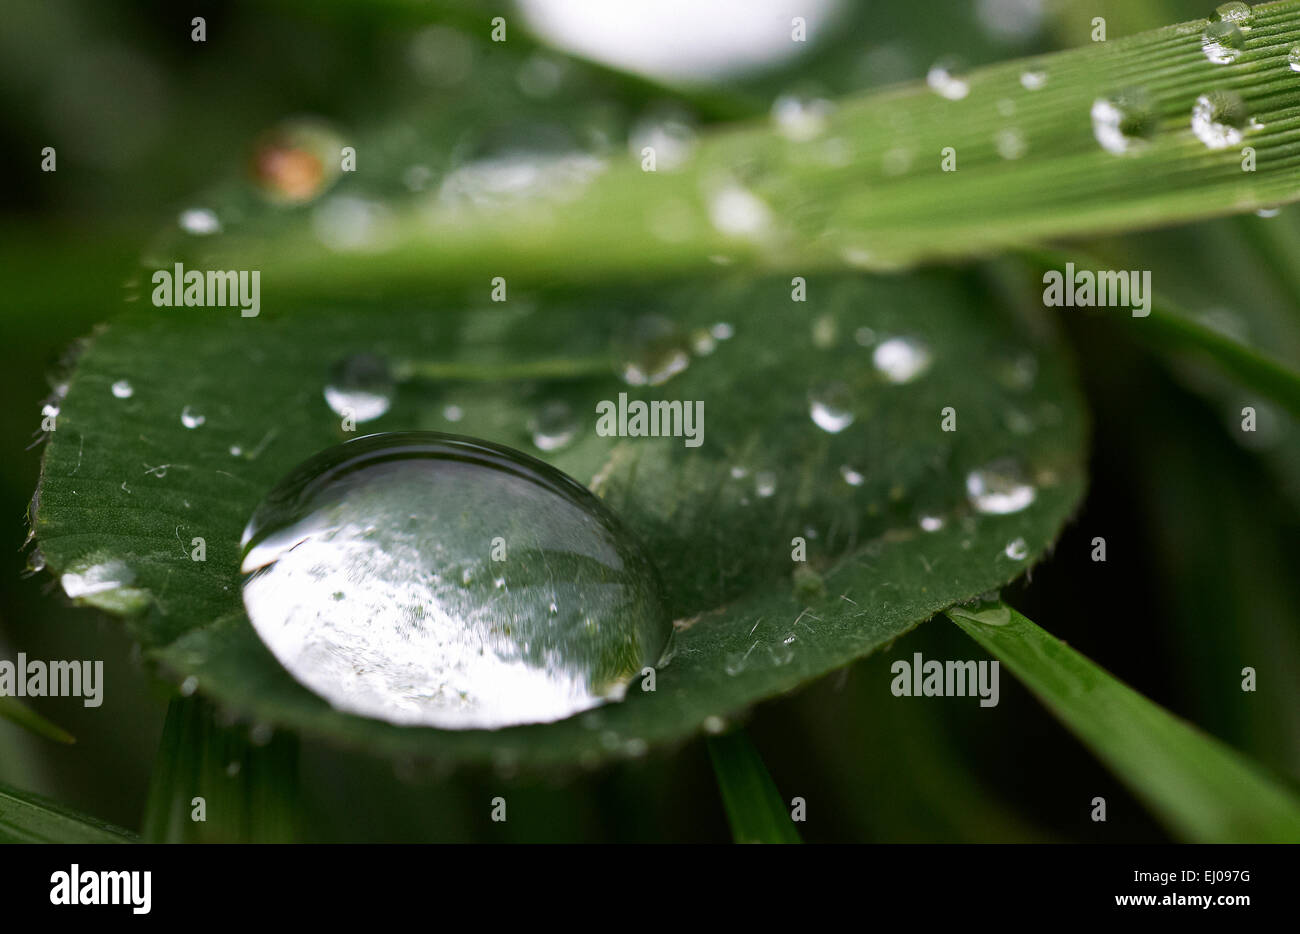 Water, dew, plant, drop, leaves, nature, dewdrop, humidity, moisture, Stock Photo